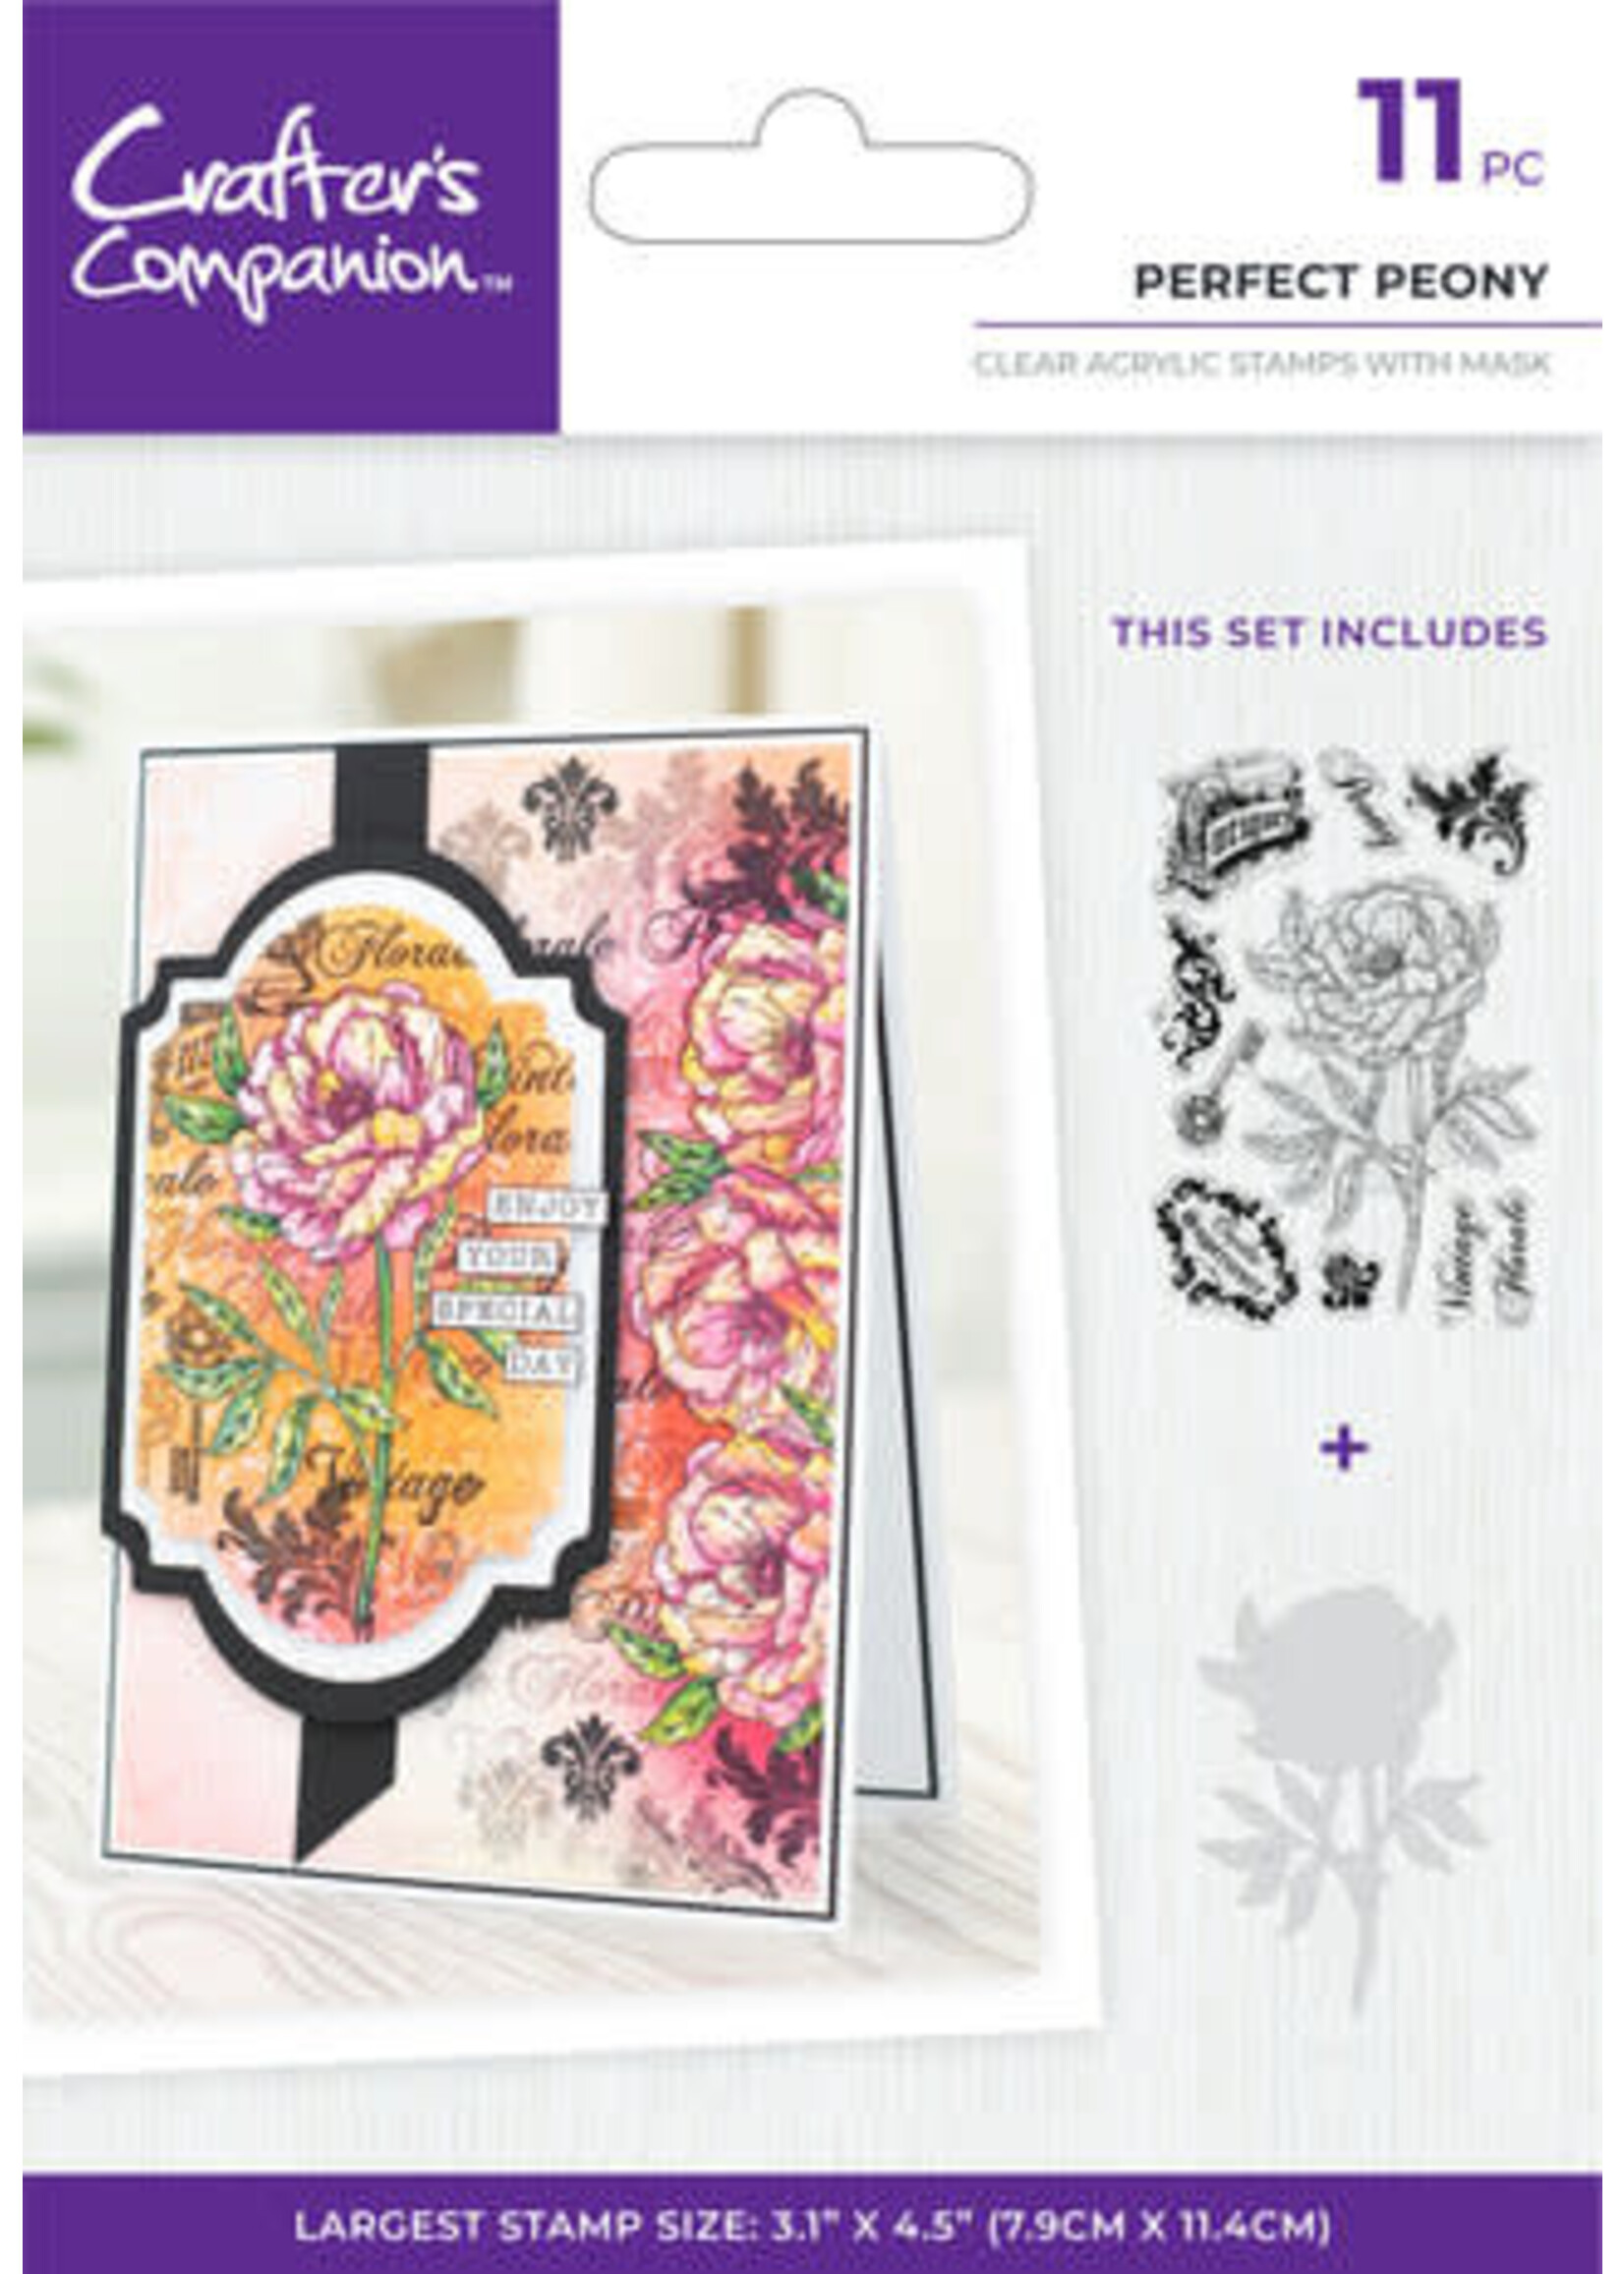 Crafters Companion Floral Collage Clear Stamp w/ Mask 4x6 Inch Perfect Peony (CC-CA-ST-PERPE)